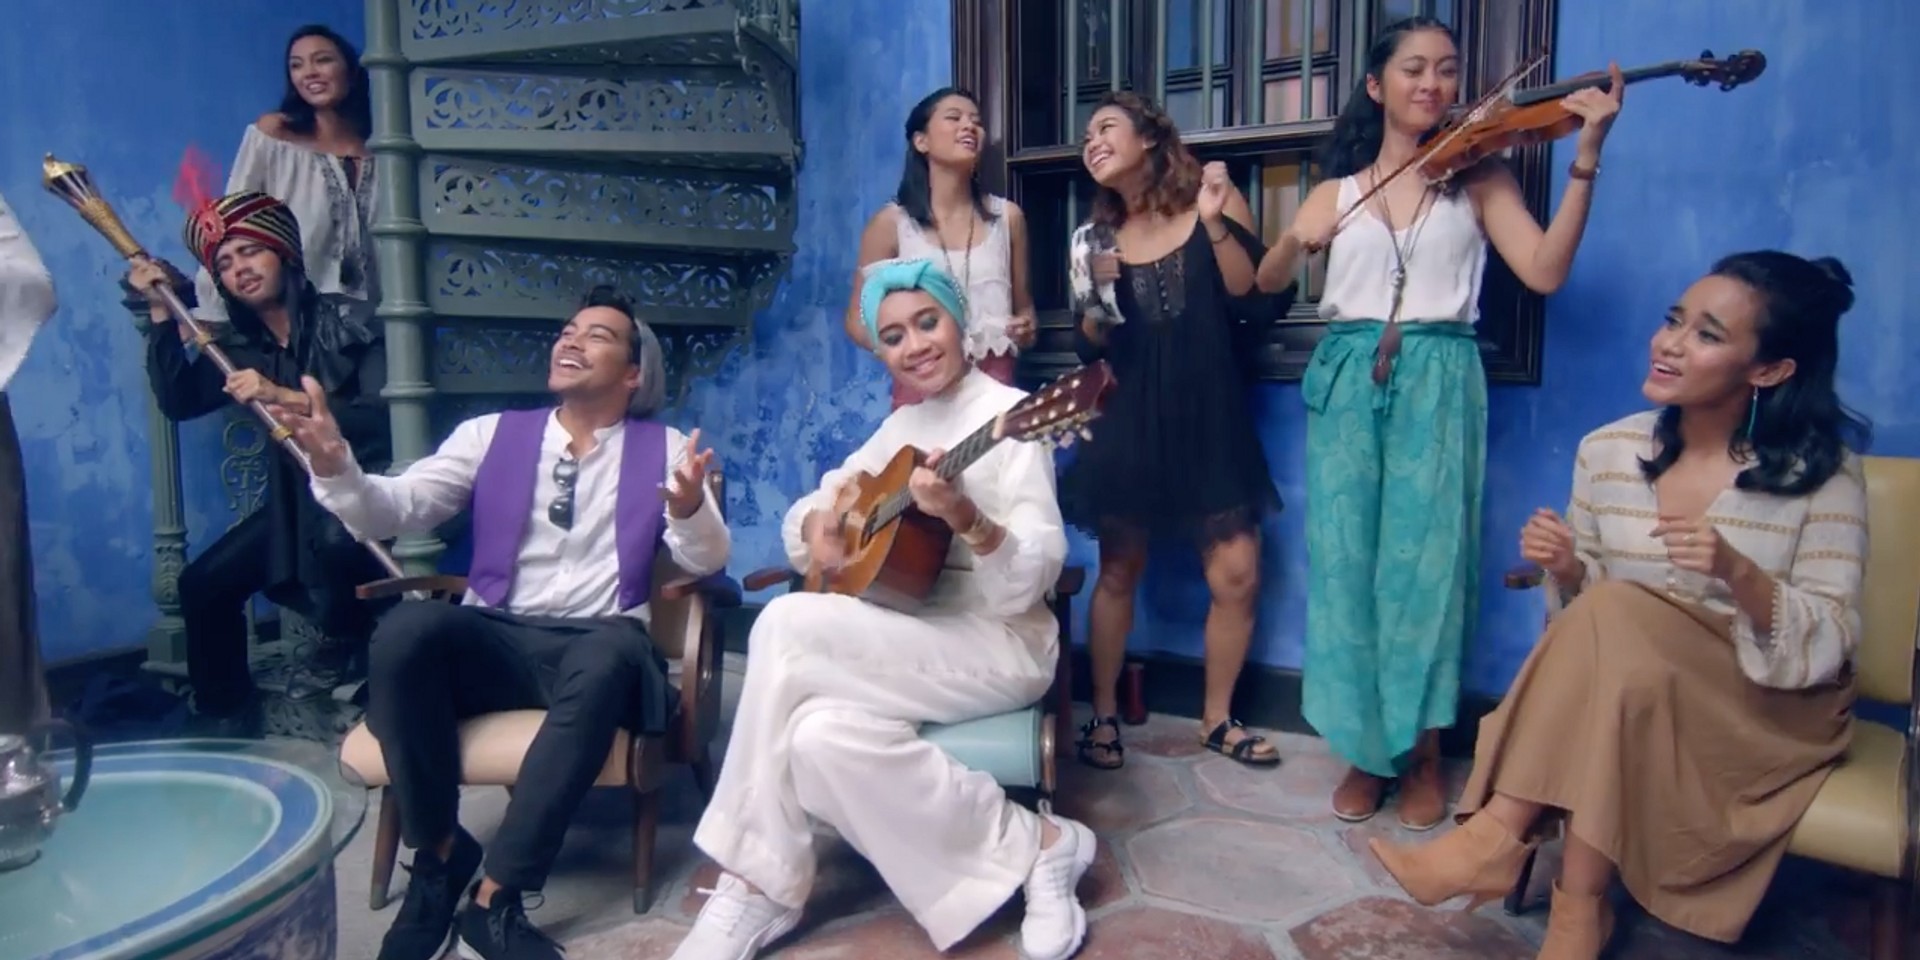 WATCH: Yuna, The Ransom Collective and GAC team up for a Wonderfilled Tale set in Penang